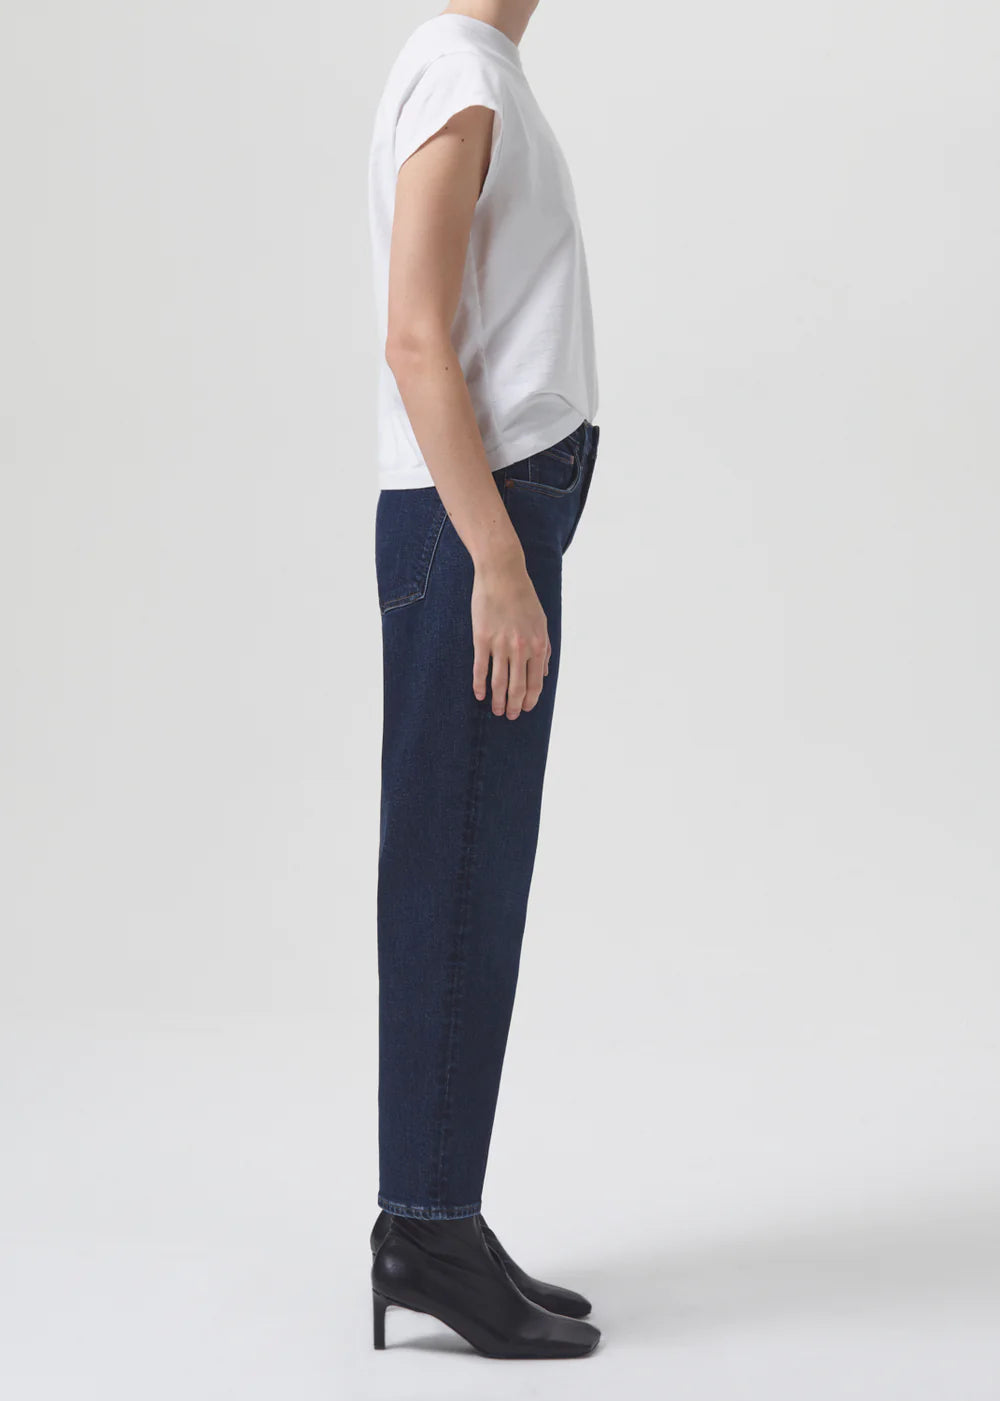 The model is wearing a white t-shirt and AGOLDE Kye Straight Crop - Song jeans.